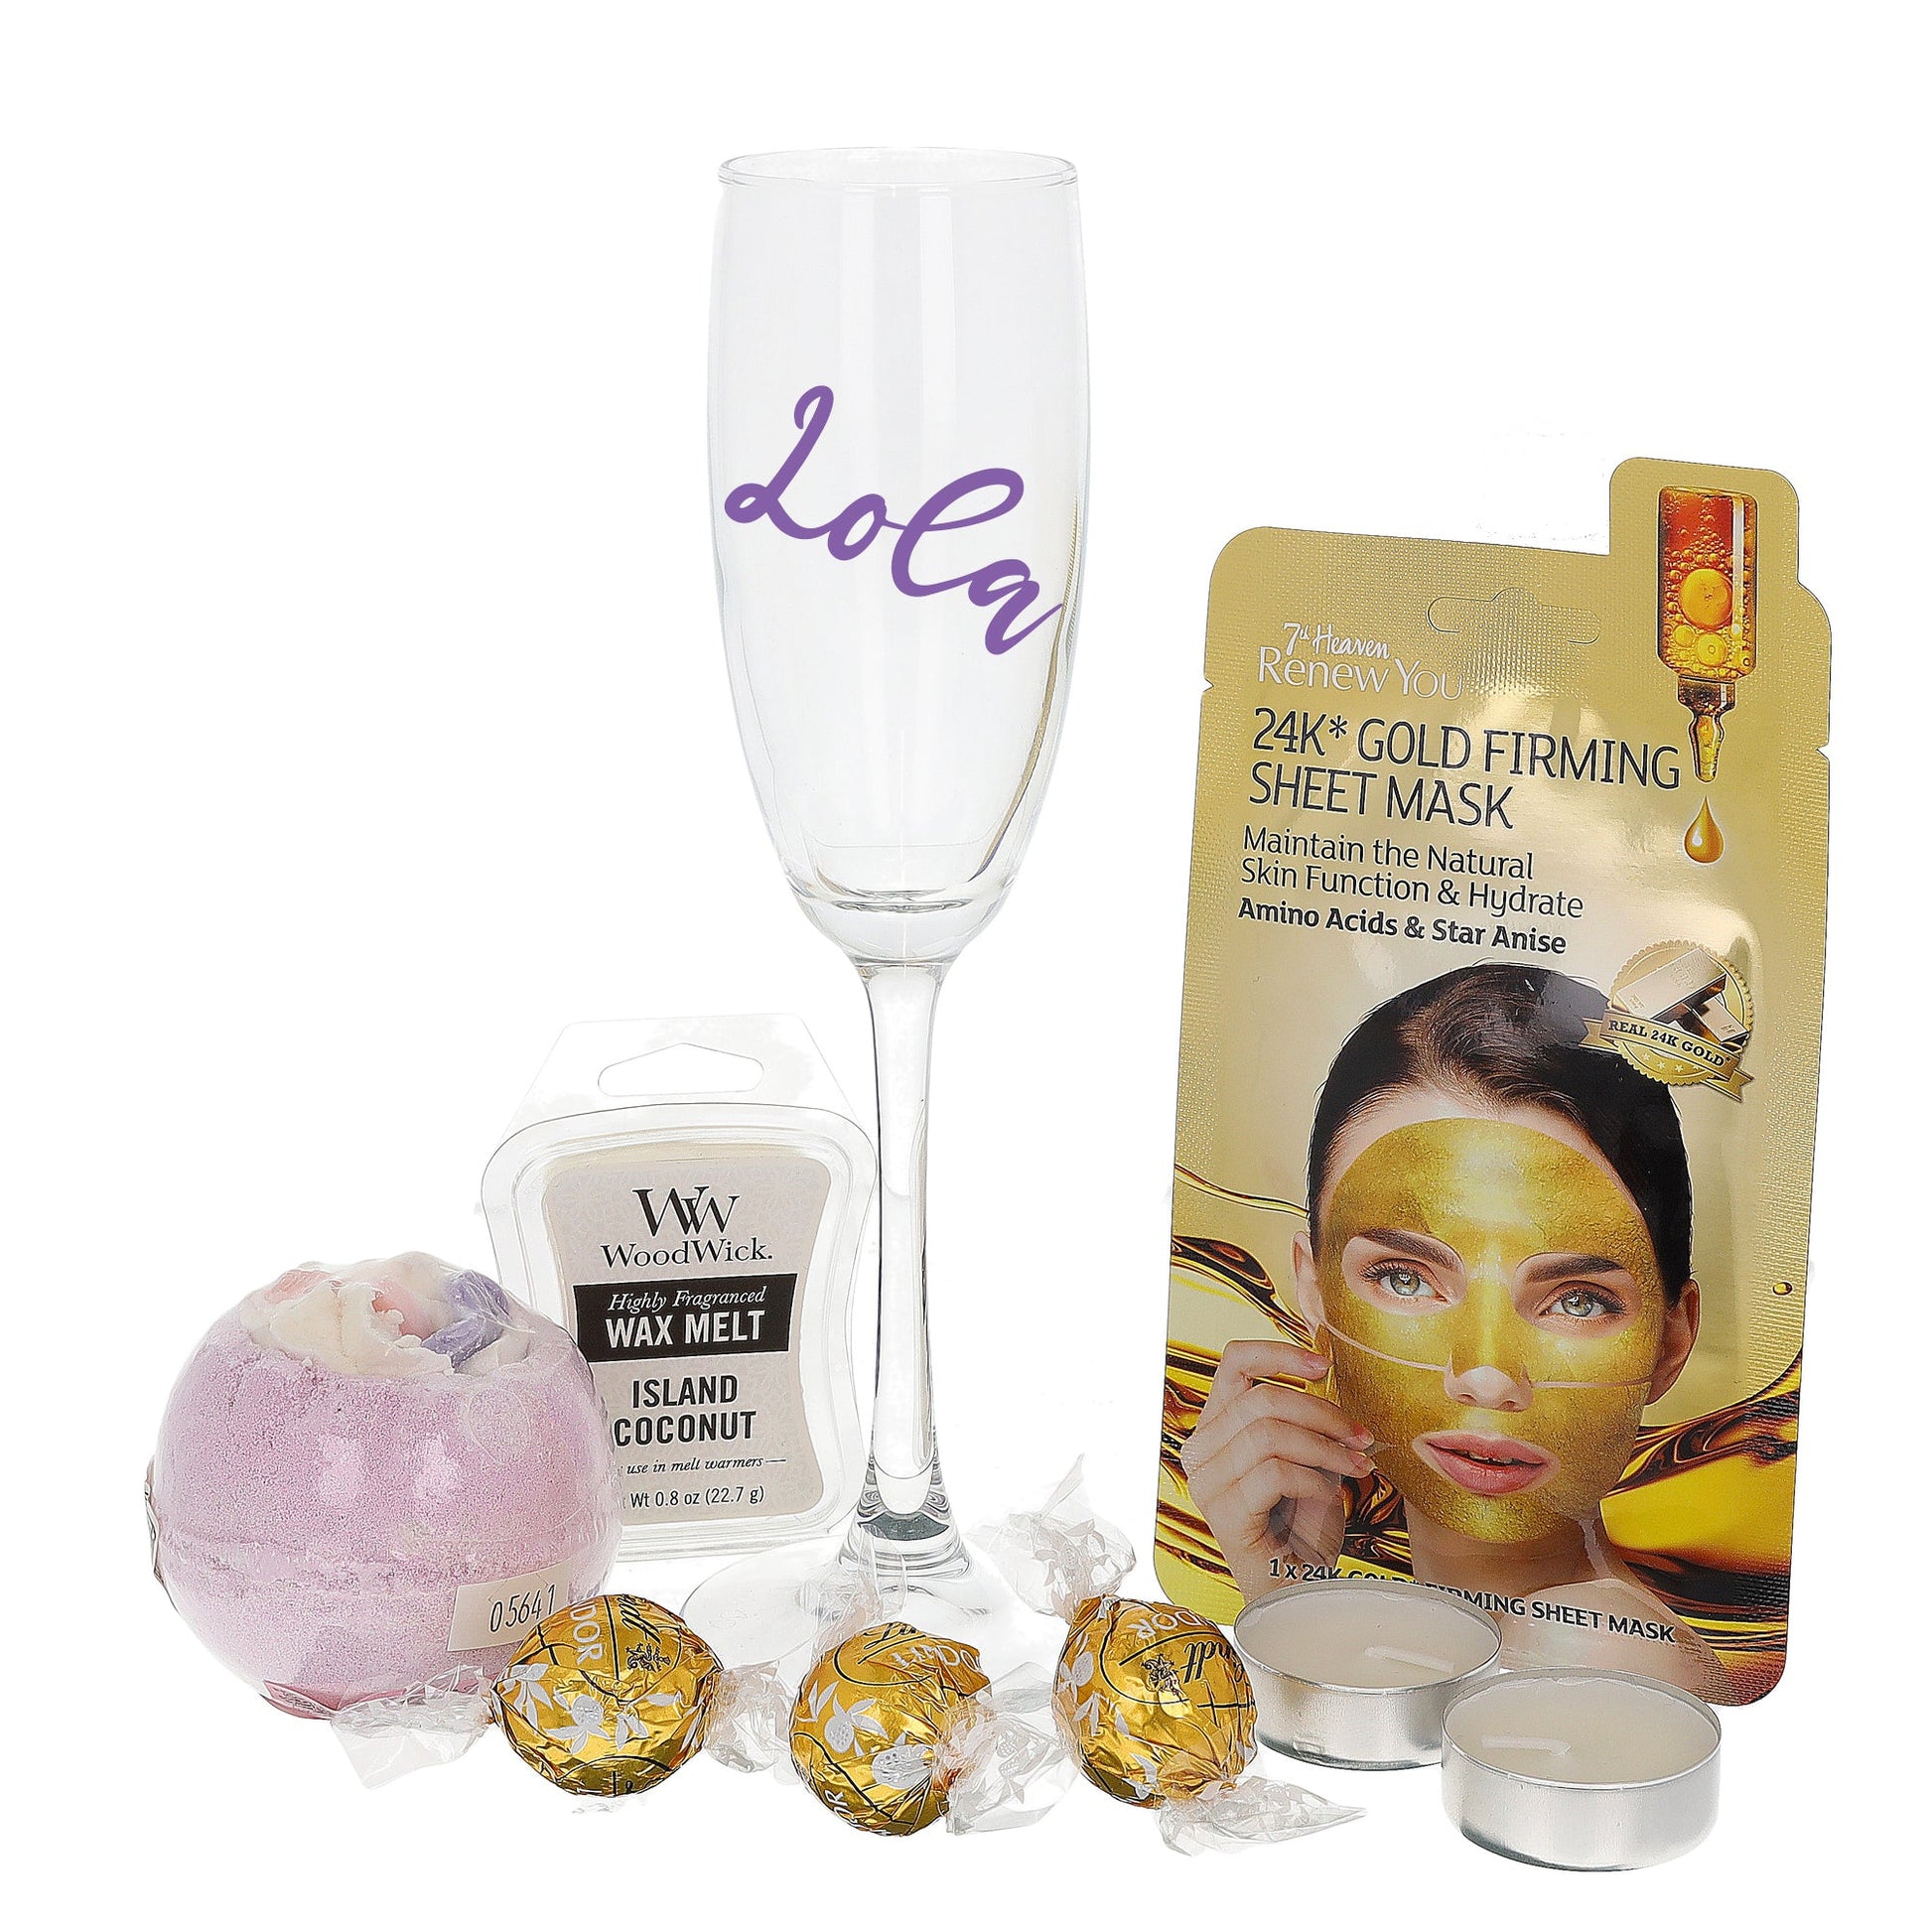 Mother's Day Personalised Prosecco / Champagne Glass Filled with Spa Pamper Gifts  - Always Looking Good -   